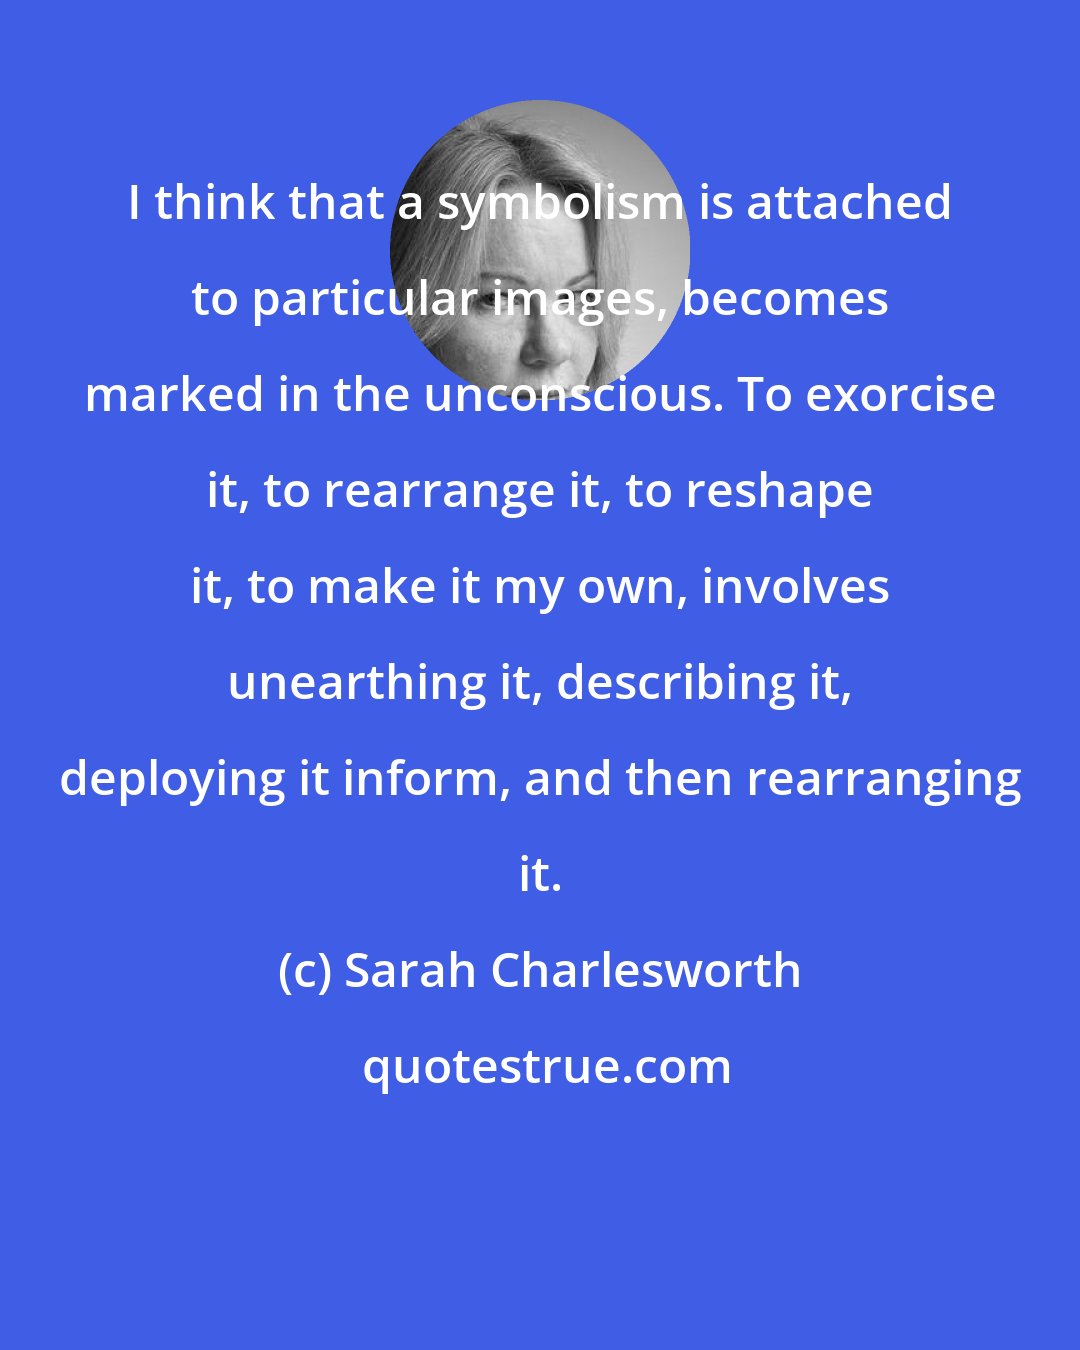 Sarah Charlesworth: I think that a symbolism is attached to particular images, becomes marked in the unconscious. To exorcise it, to rearrange it, to reshape it, to make it my own, involves unearthing it, describing it, deploying it inform, and then rearranging it.